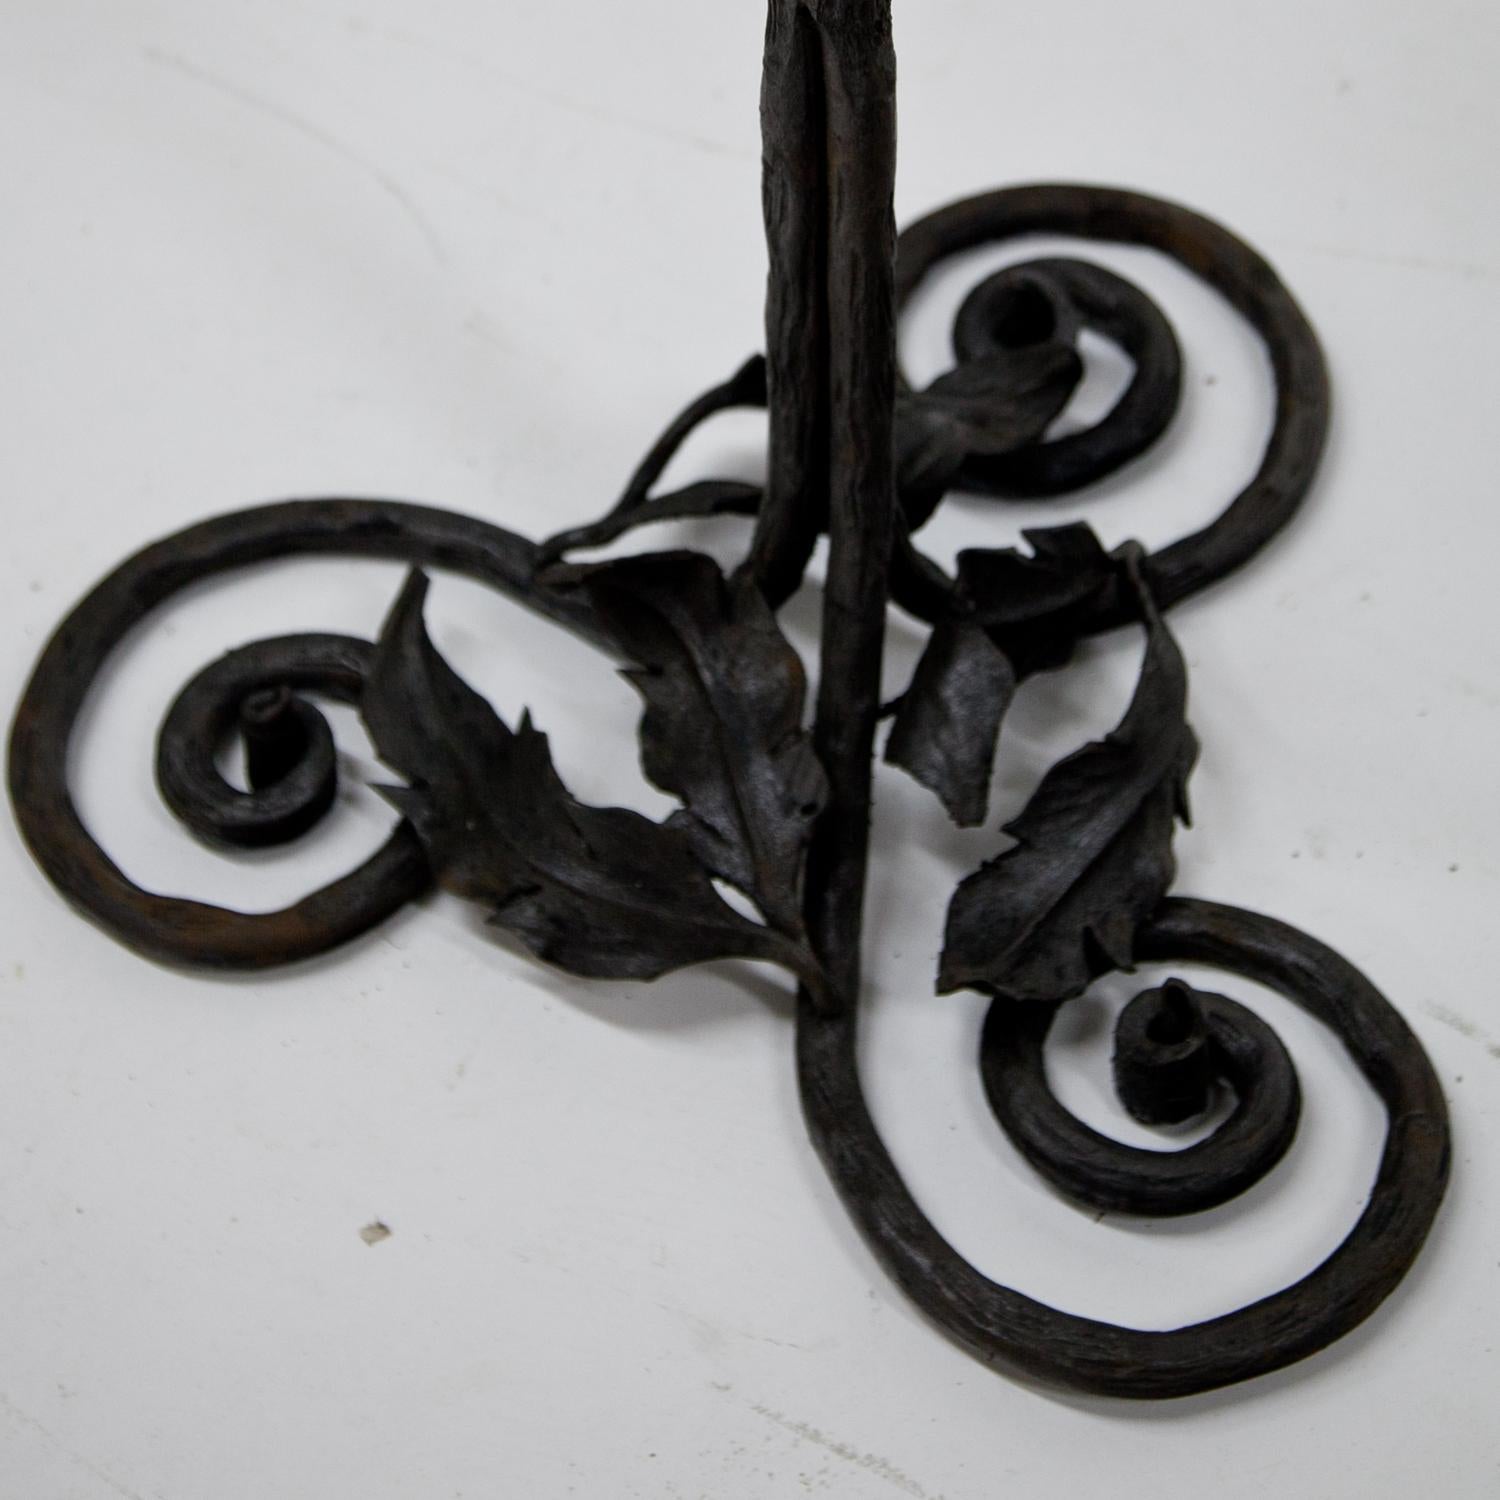 Art Nouveau Wrought Iron Candlestick Attributed to Alessandro Mazzucotelli, Italy